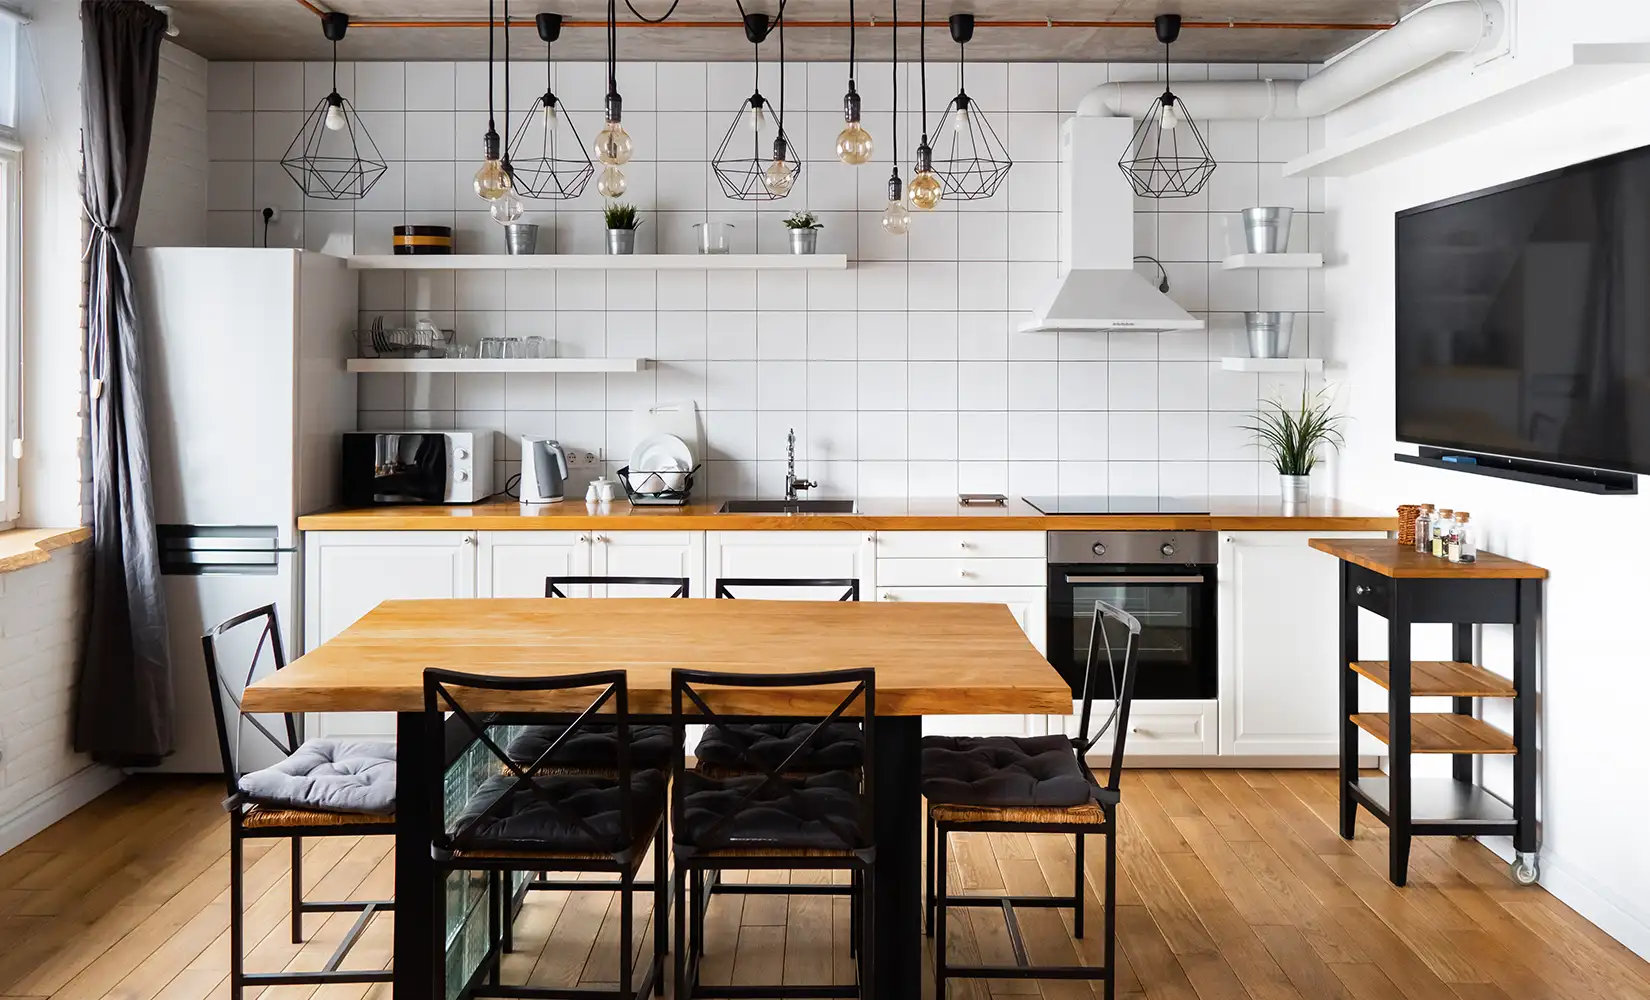 Modern industrial kitchen with wood flooring, dining table, hanging light fixtures, and a white tile backsplash.